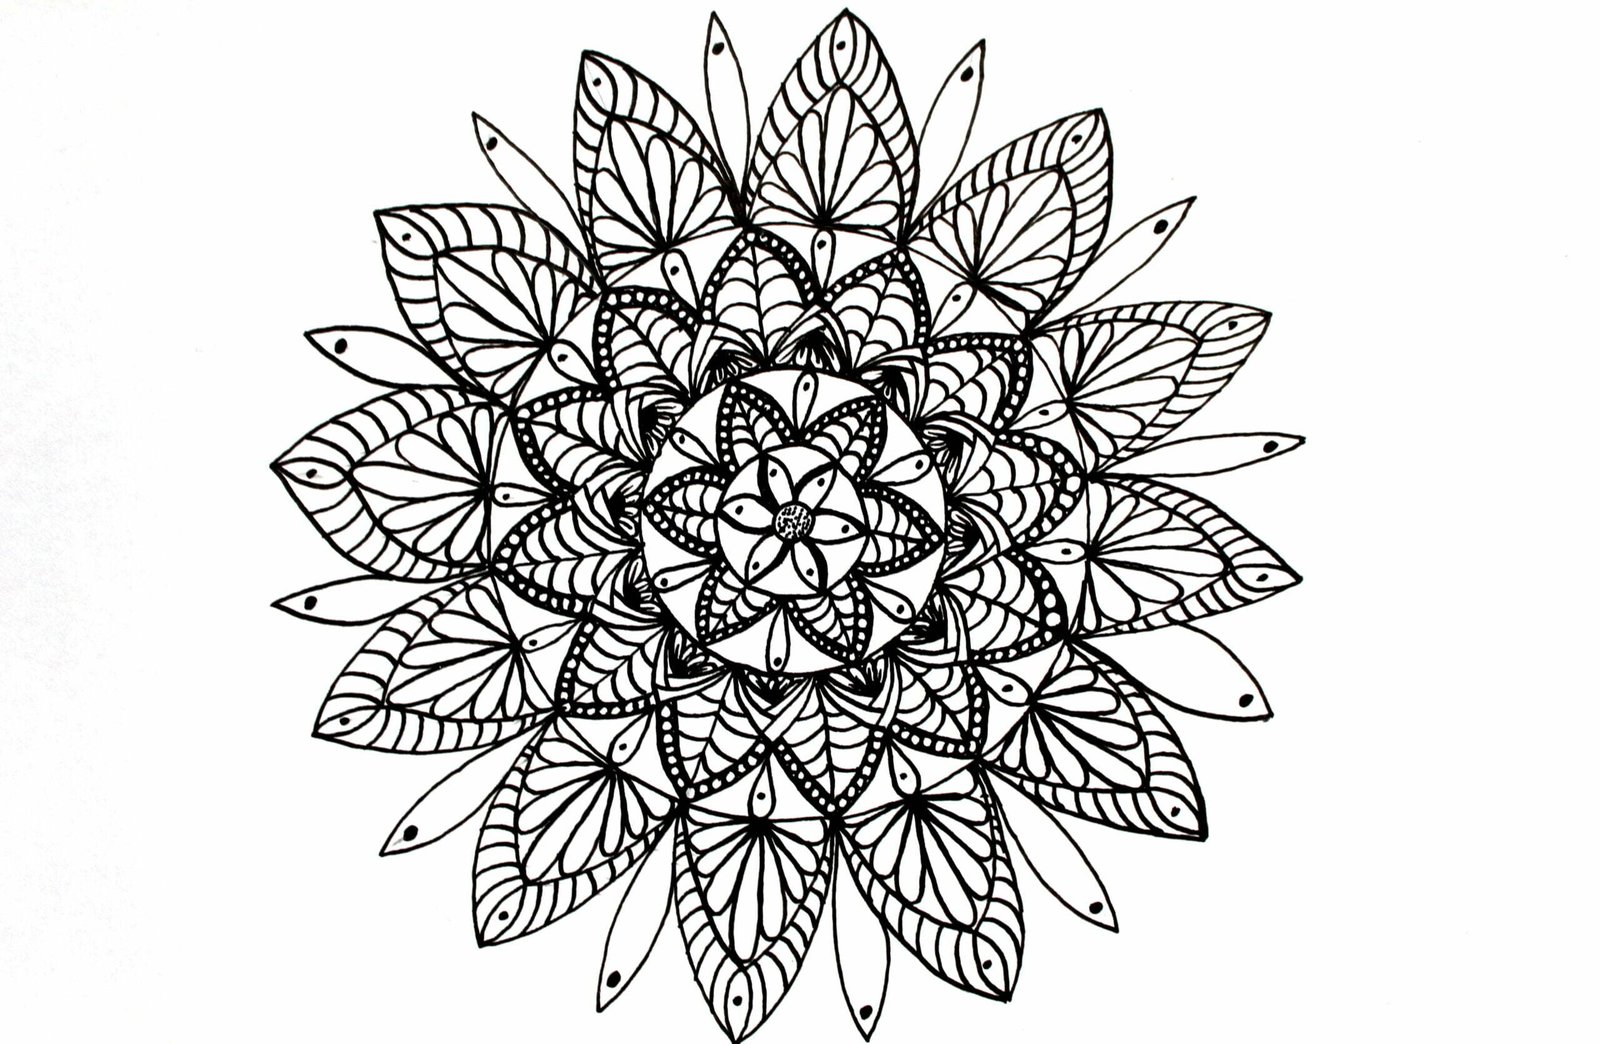 How to Draw a Beautiful Mandala {Step-by-Step Tutorial} with Pen and Paper